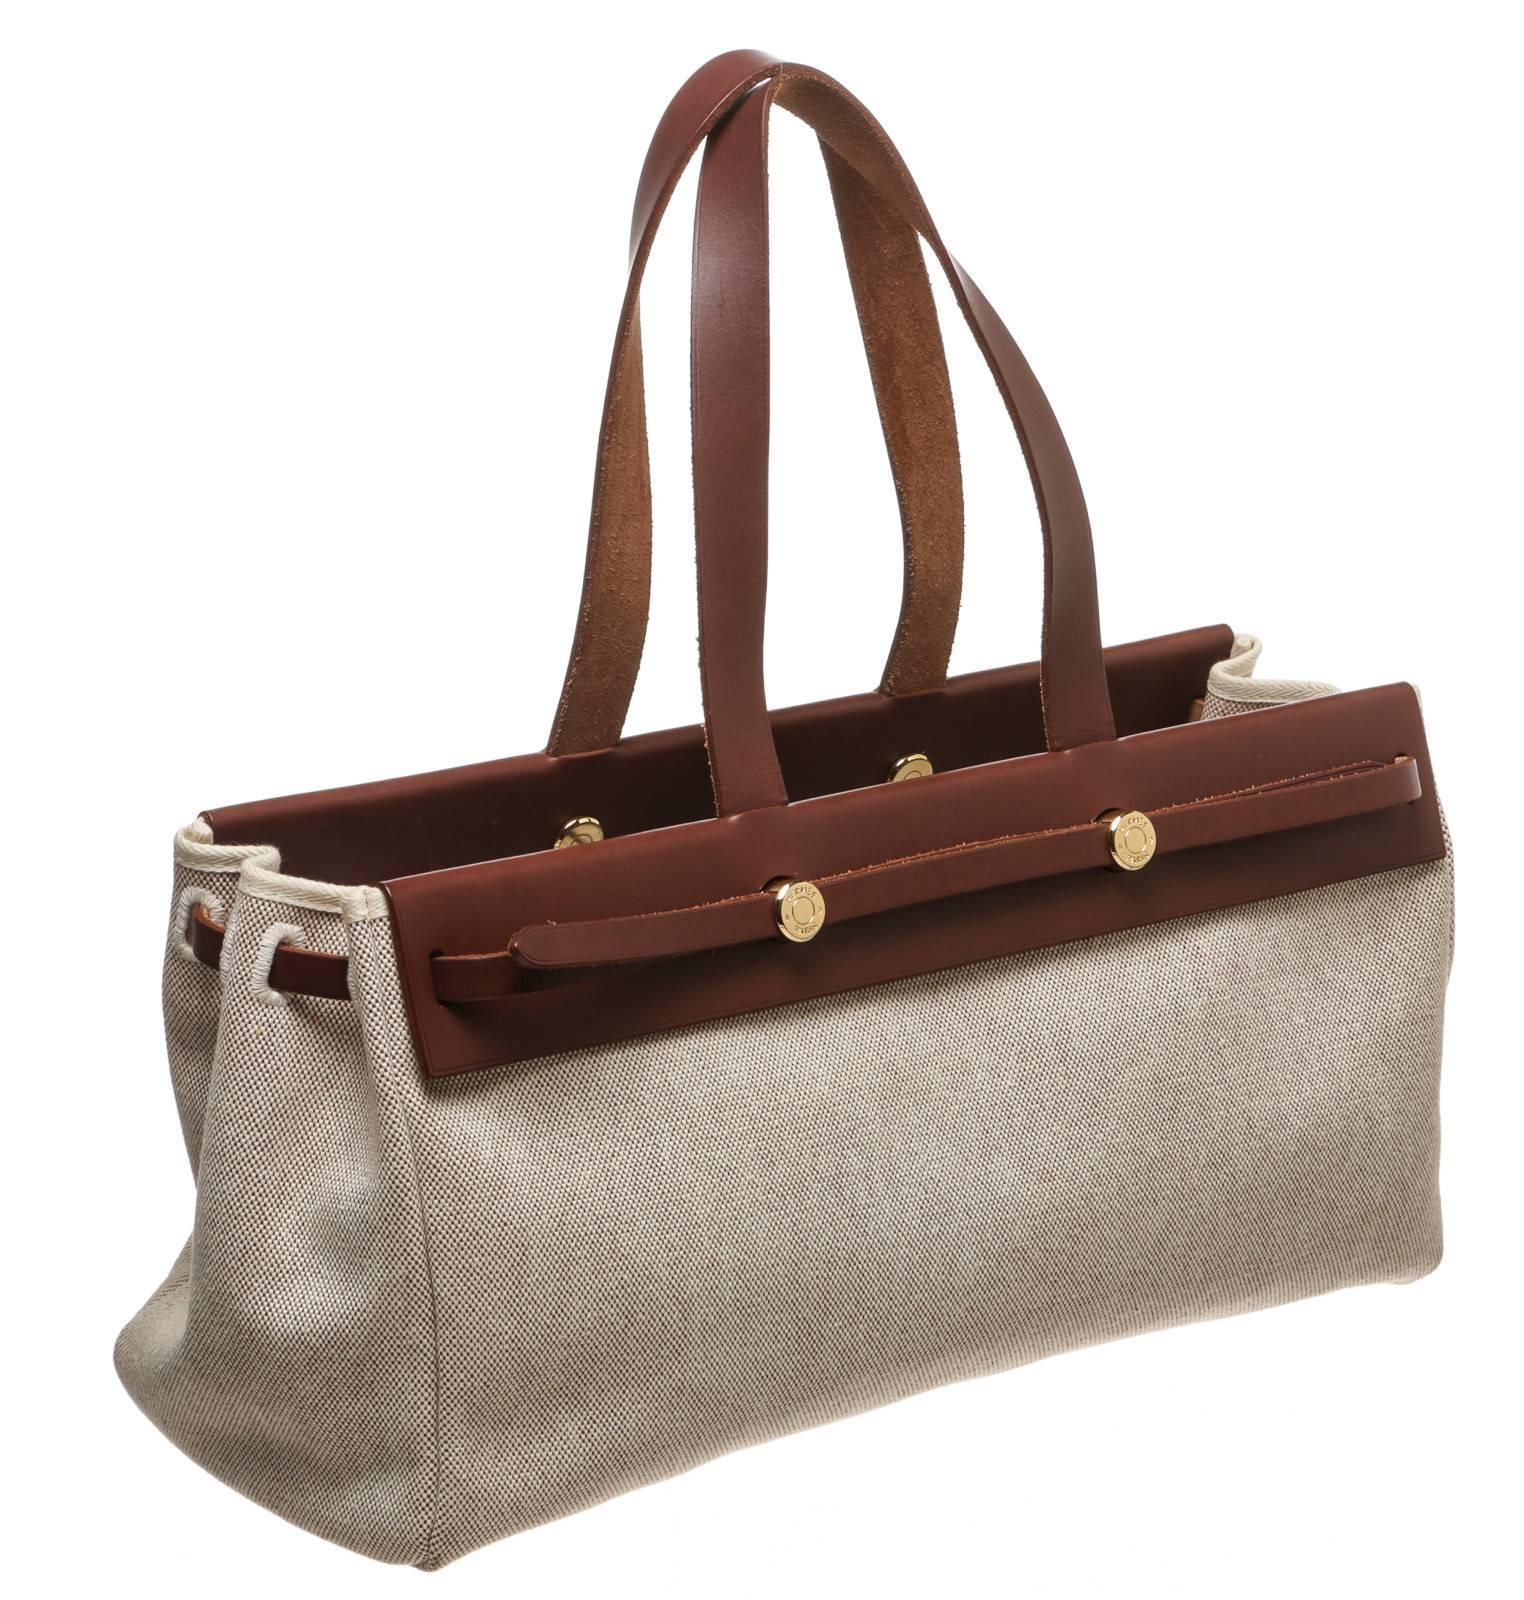 This versatile and stunning bag from Hermes offers you a go-to item for multiple occasions! It comes in a tan canvas with brown leather contrast as it closes off with a flap over the top. The interior contains a simple and open design for the